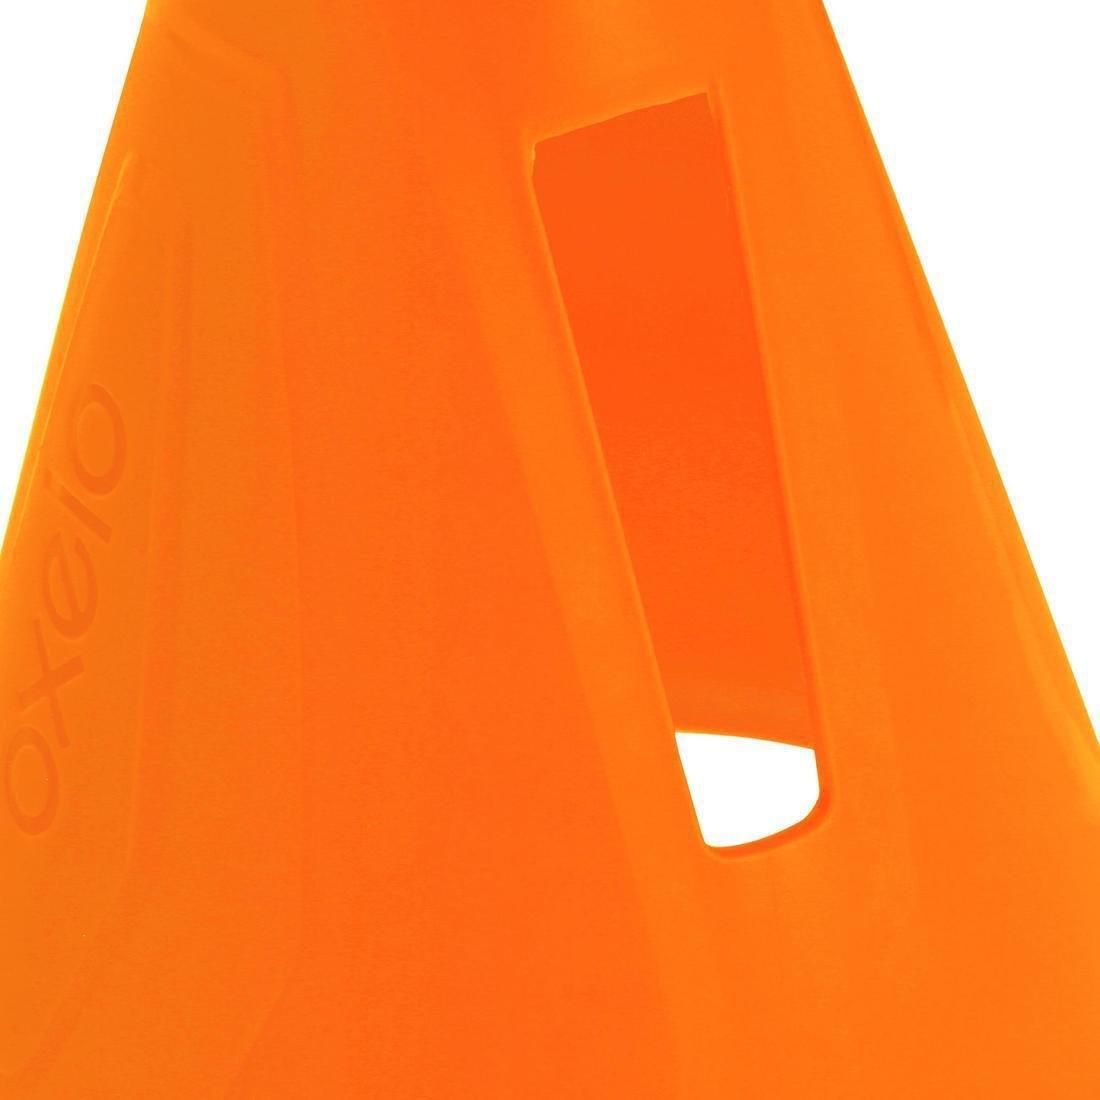 OXELO - Inline Skating Slalom Cones 10-Pack, Fluo Green